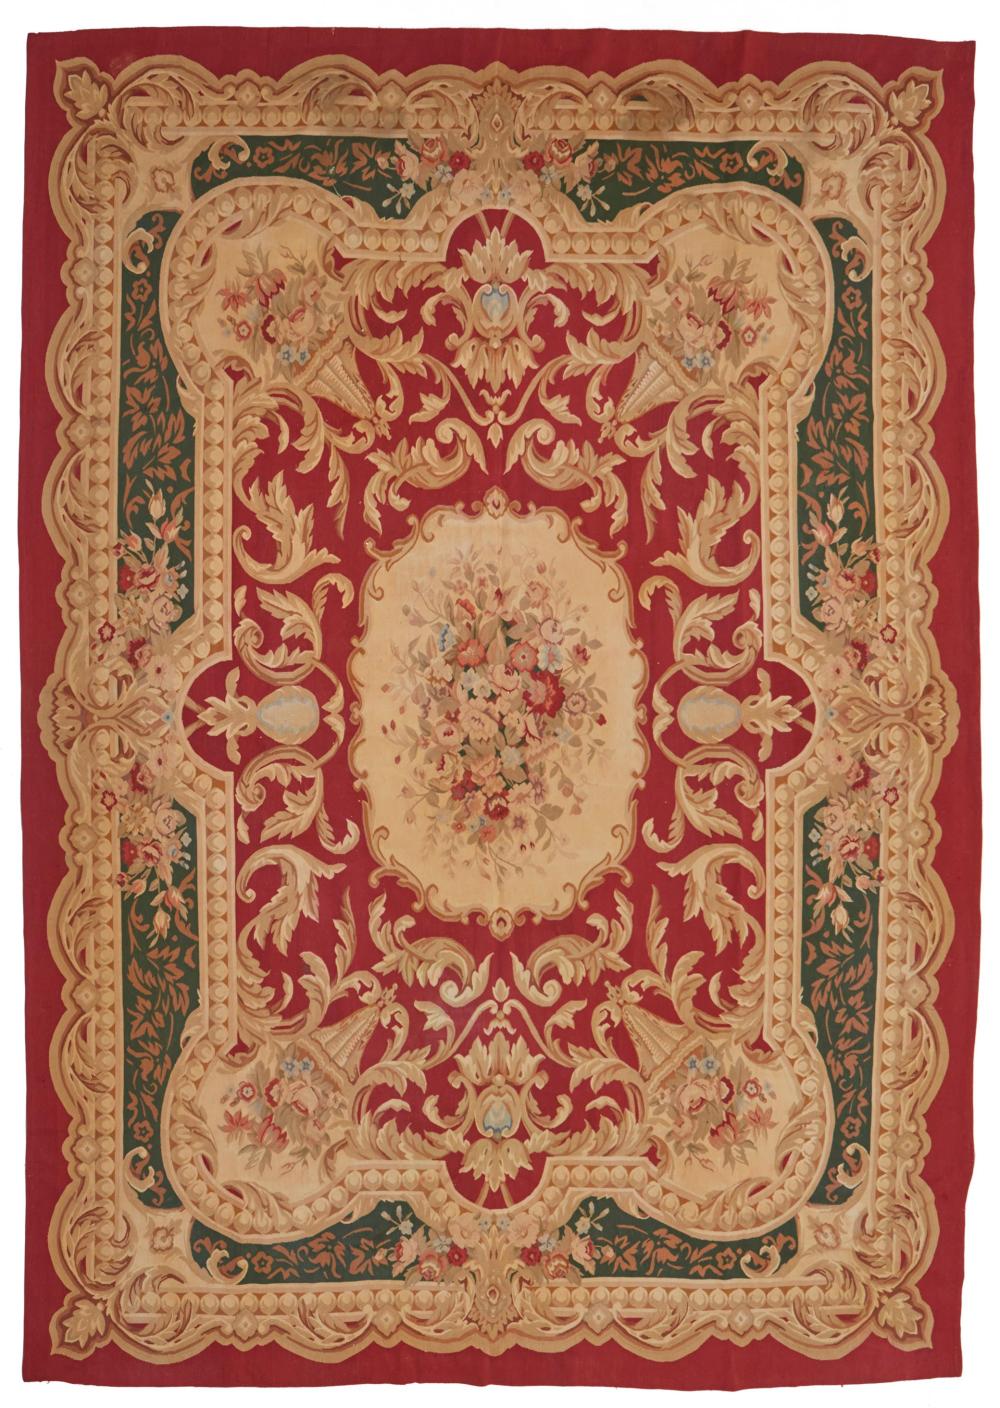 AN AUBUSSON TAPESTRY RUGAn Aubusson